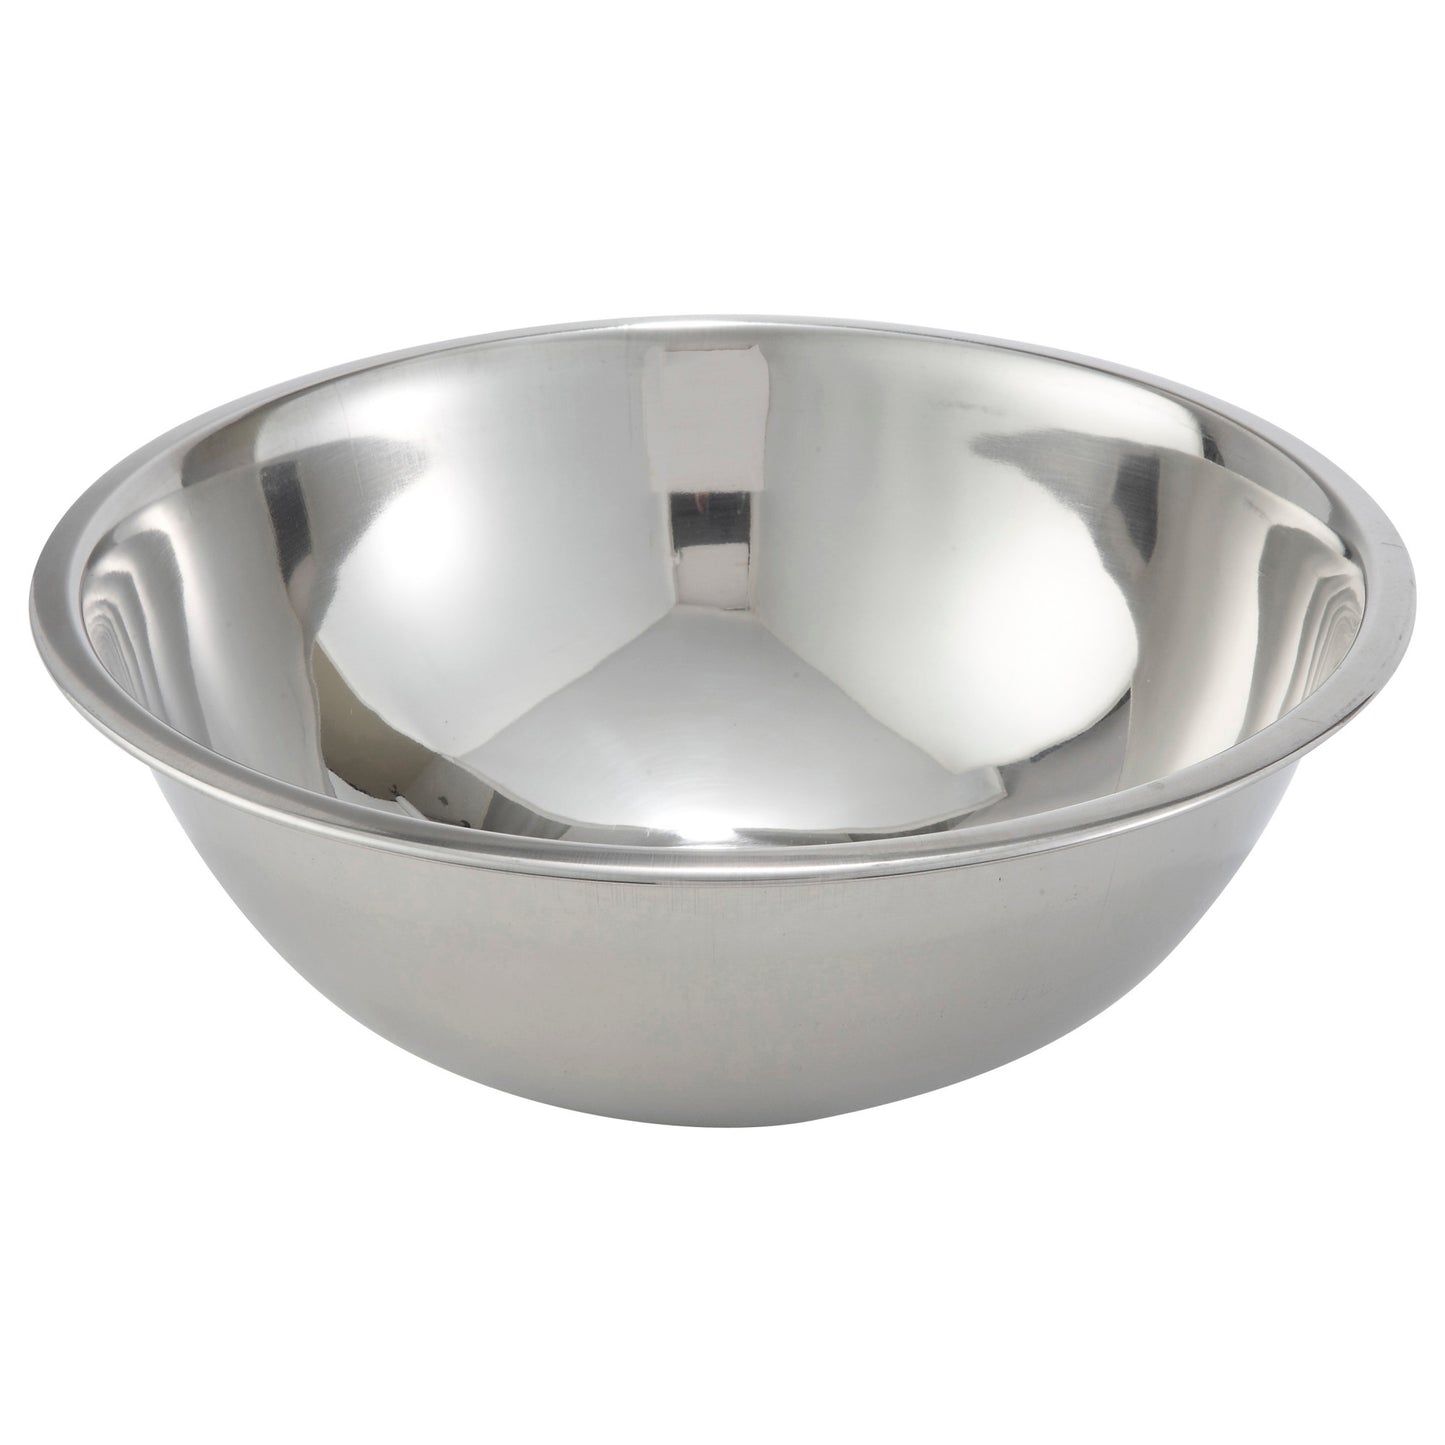 MXBT-800Q - All-Purpose True Capacity Mixing Bowl, Stainless Steel - 8 Quart